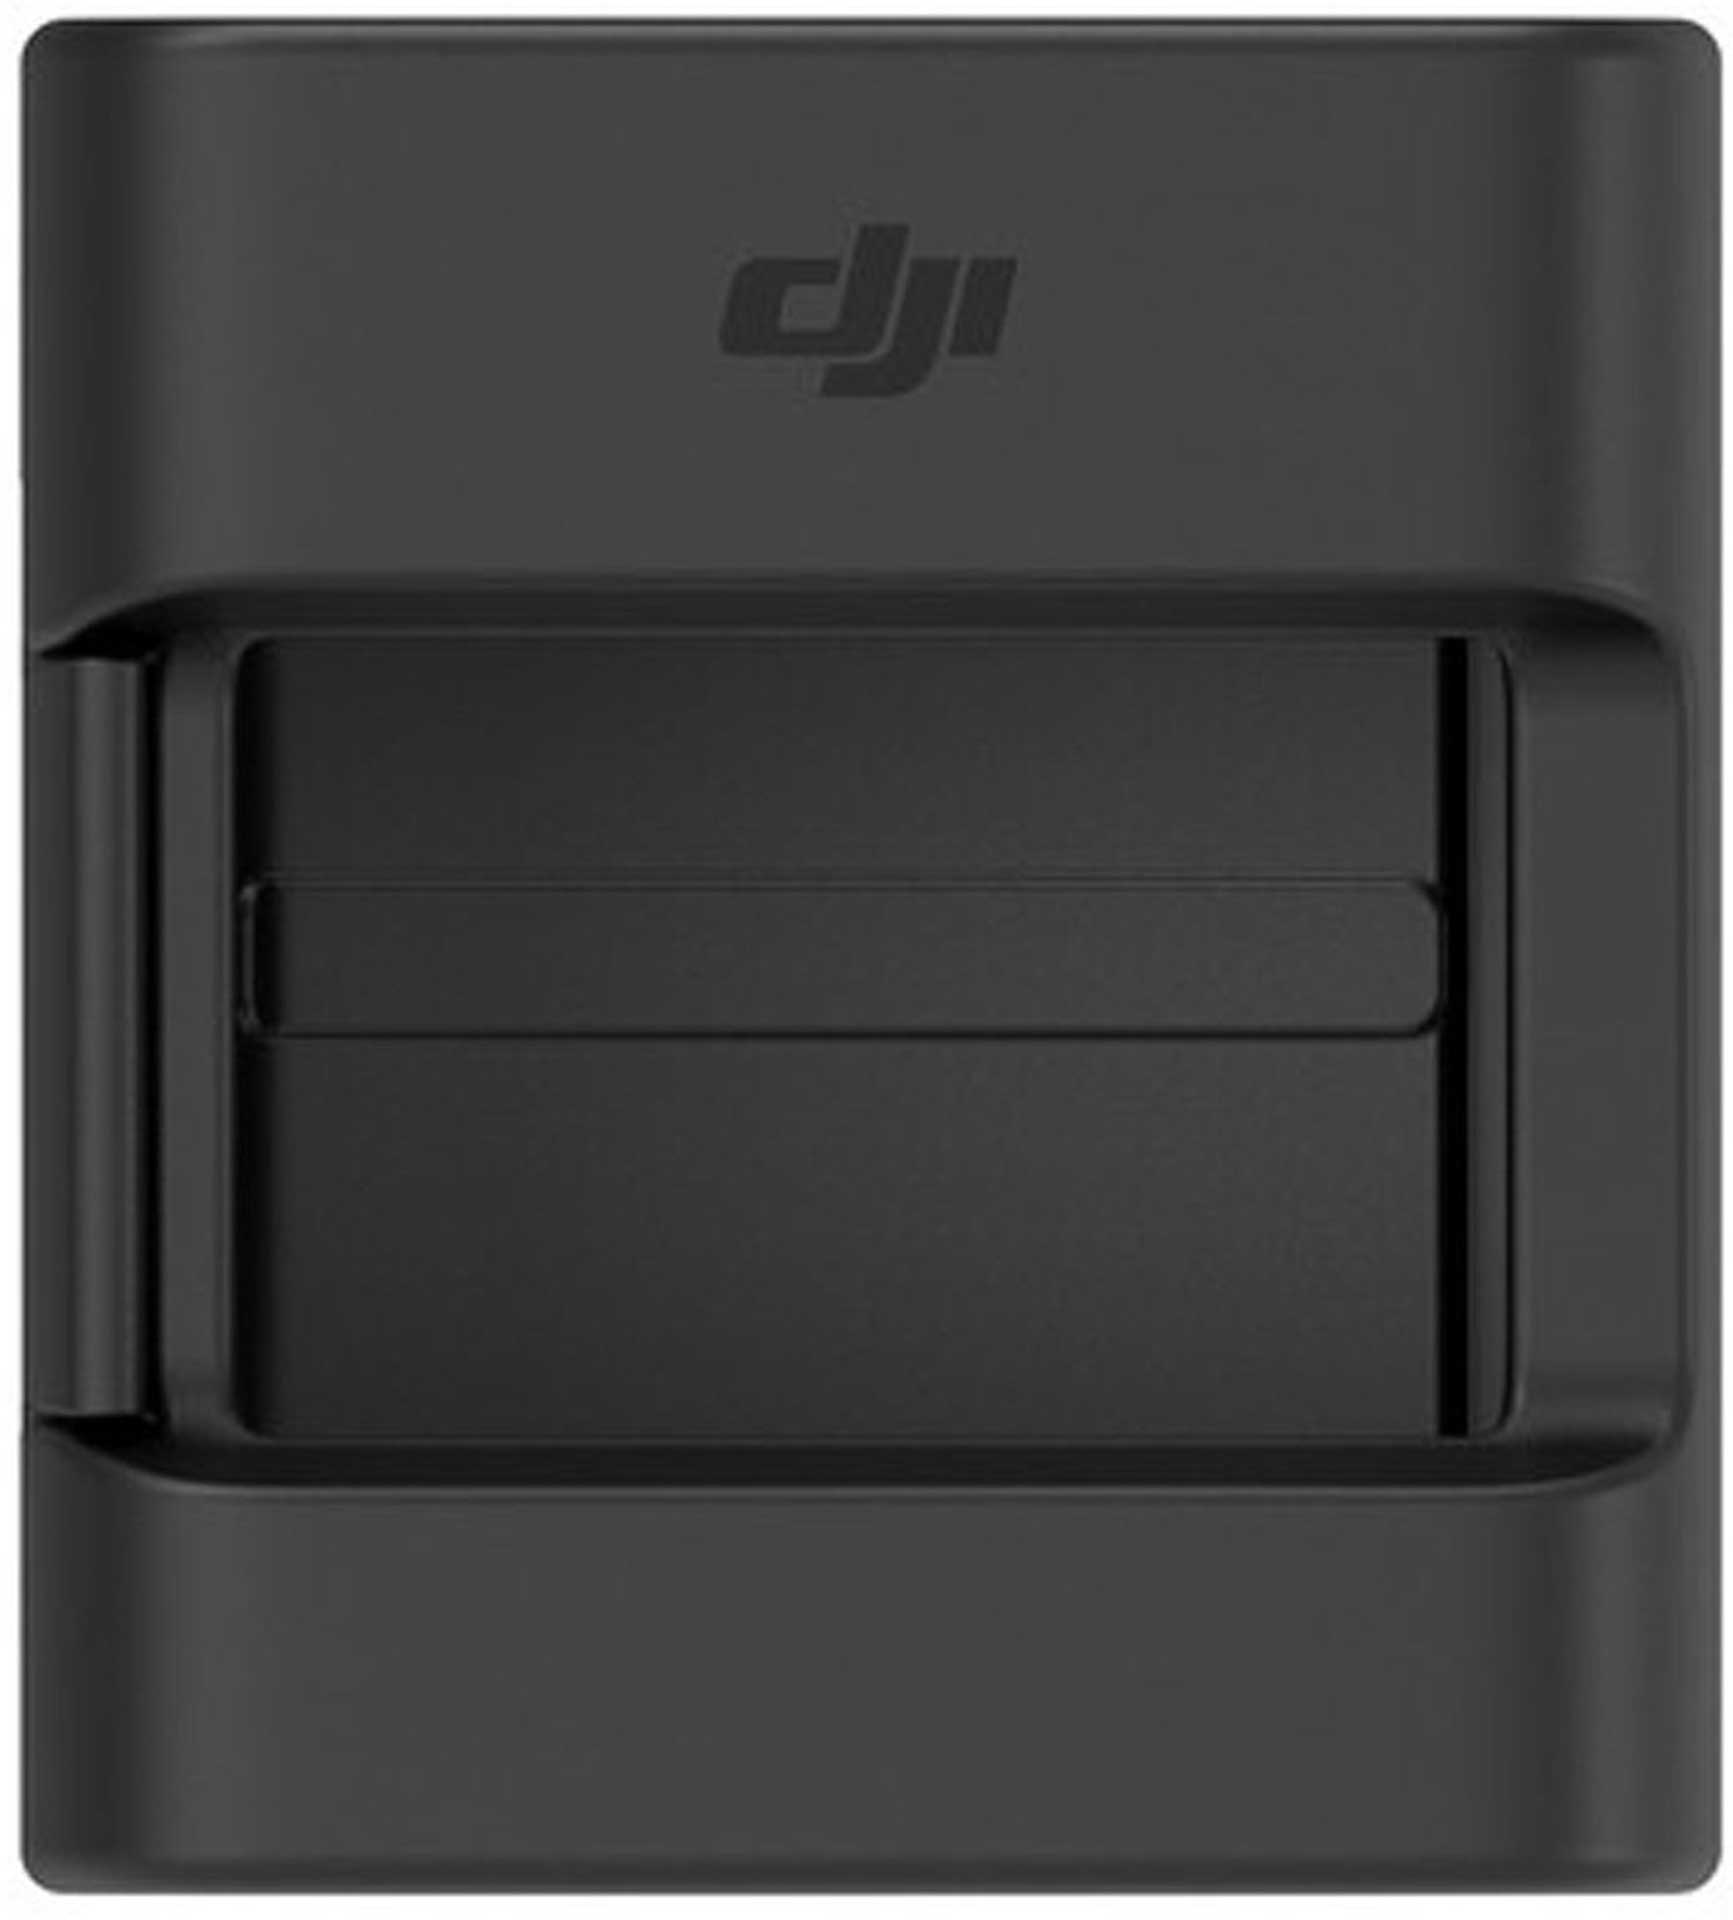 DJI OSMO POCKET Support pour accessoires